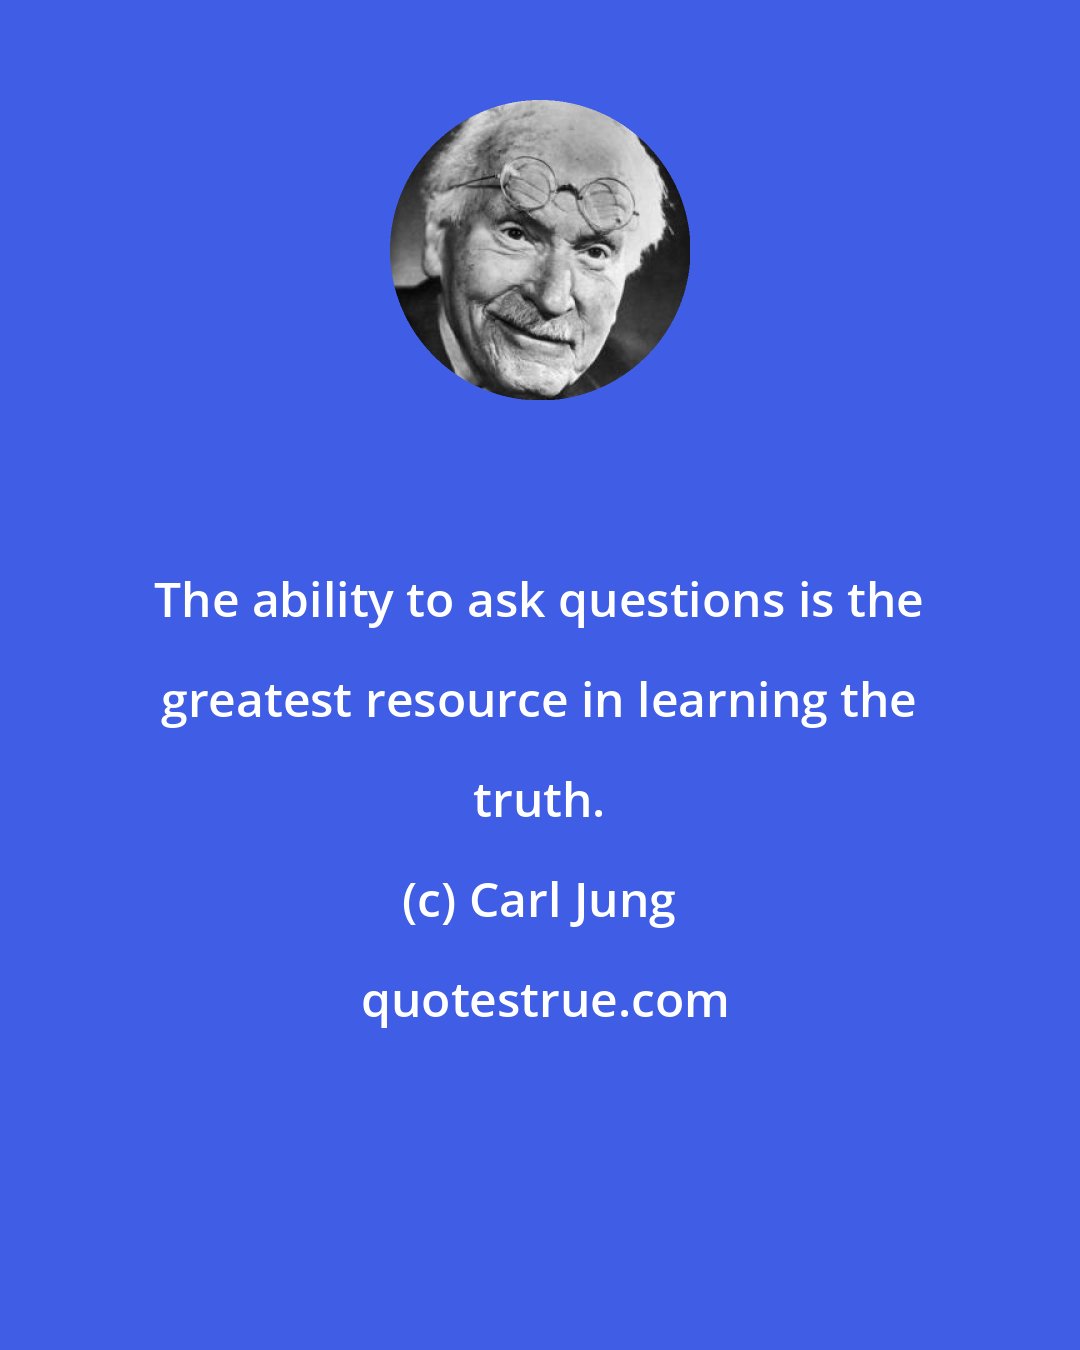 Carl Jung: The ability to ask questions is the greatest resource in learning the truth.